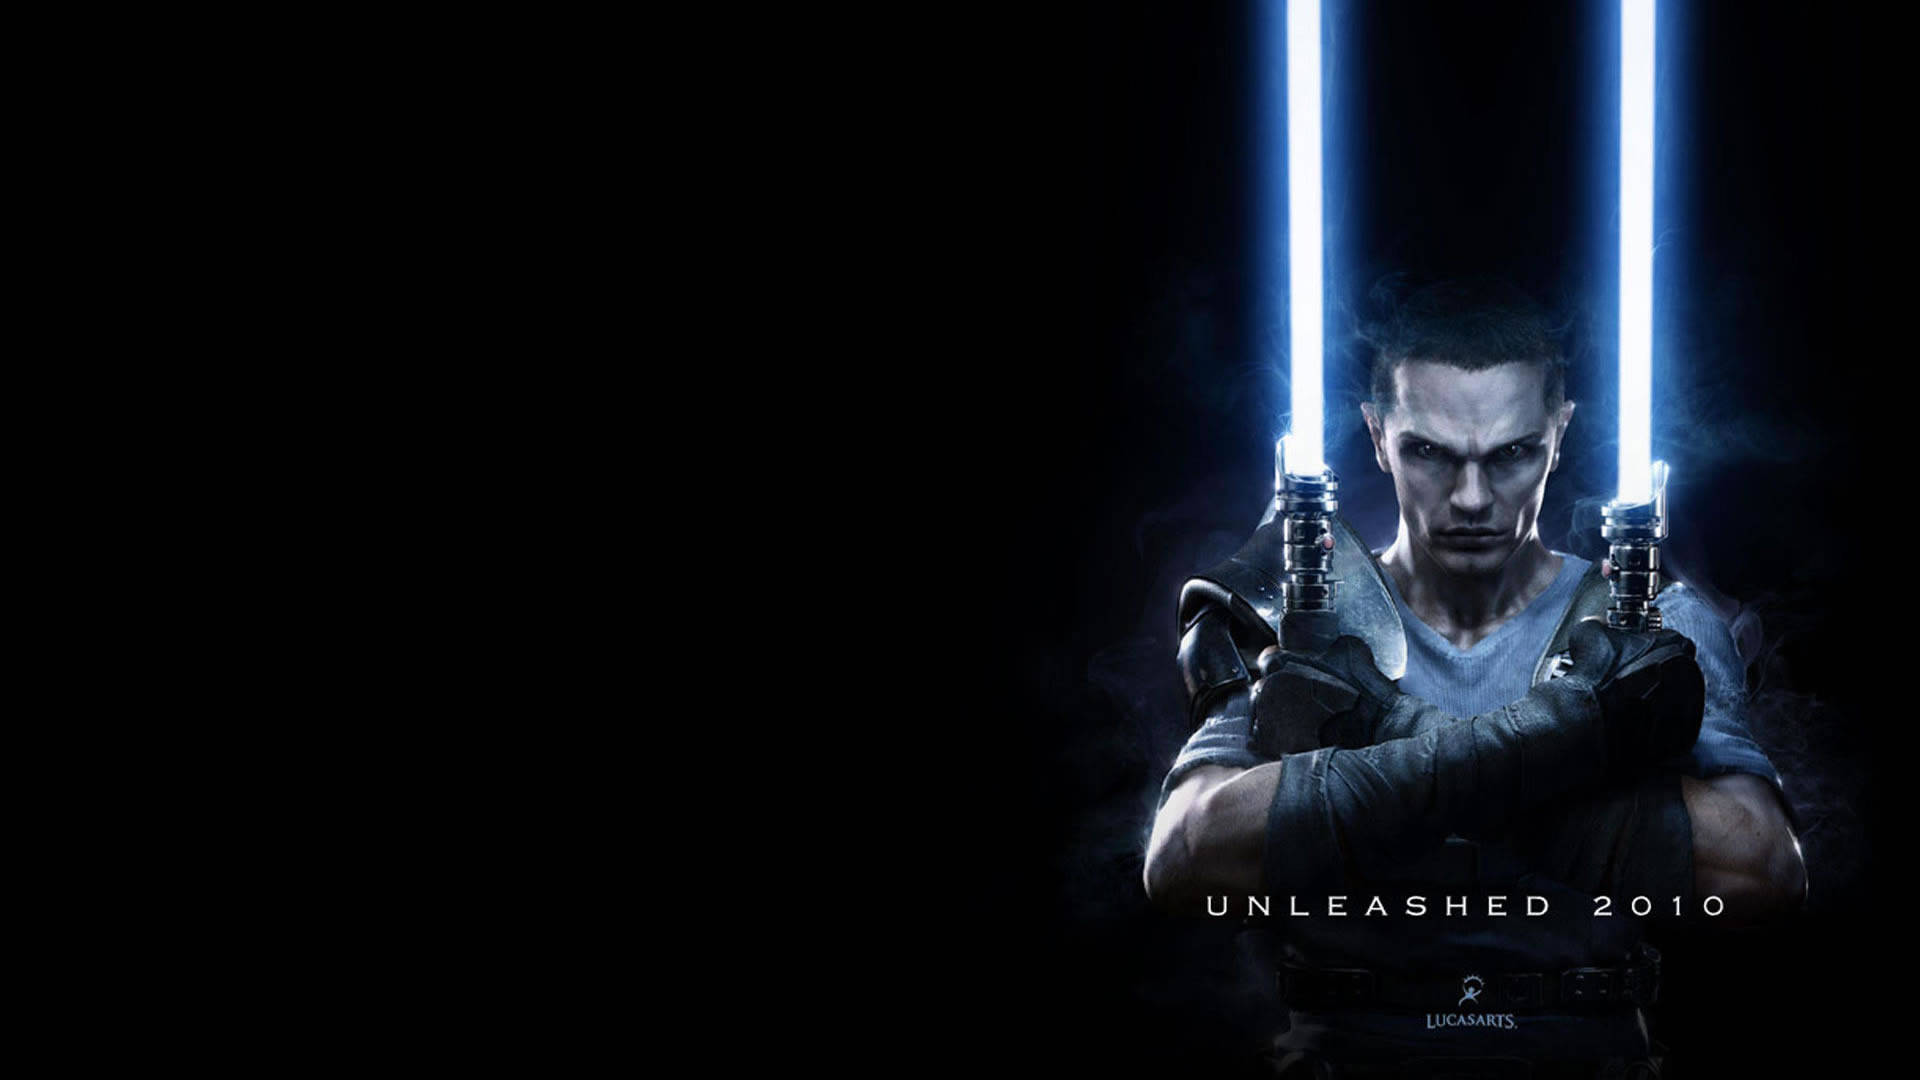 Epic Star Wars: The Force Unleashed Background